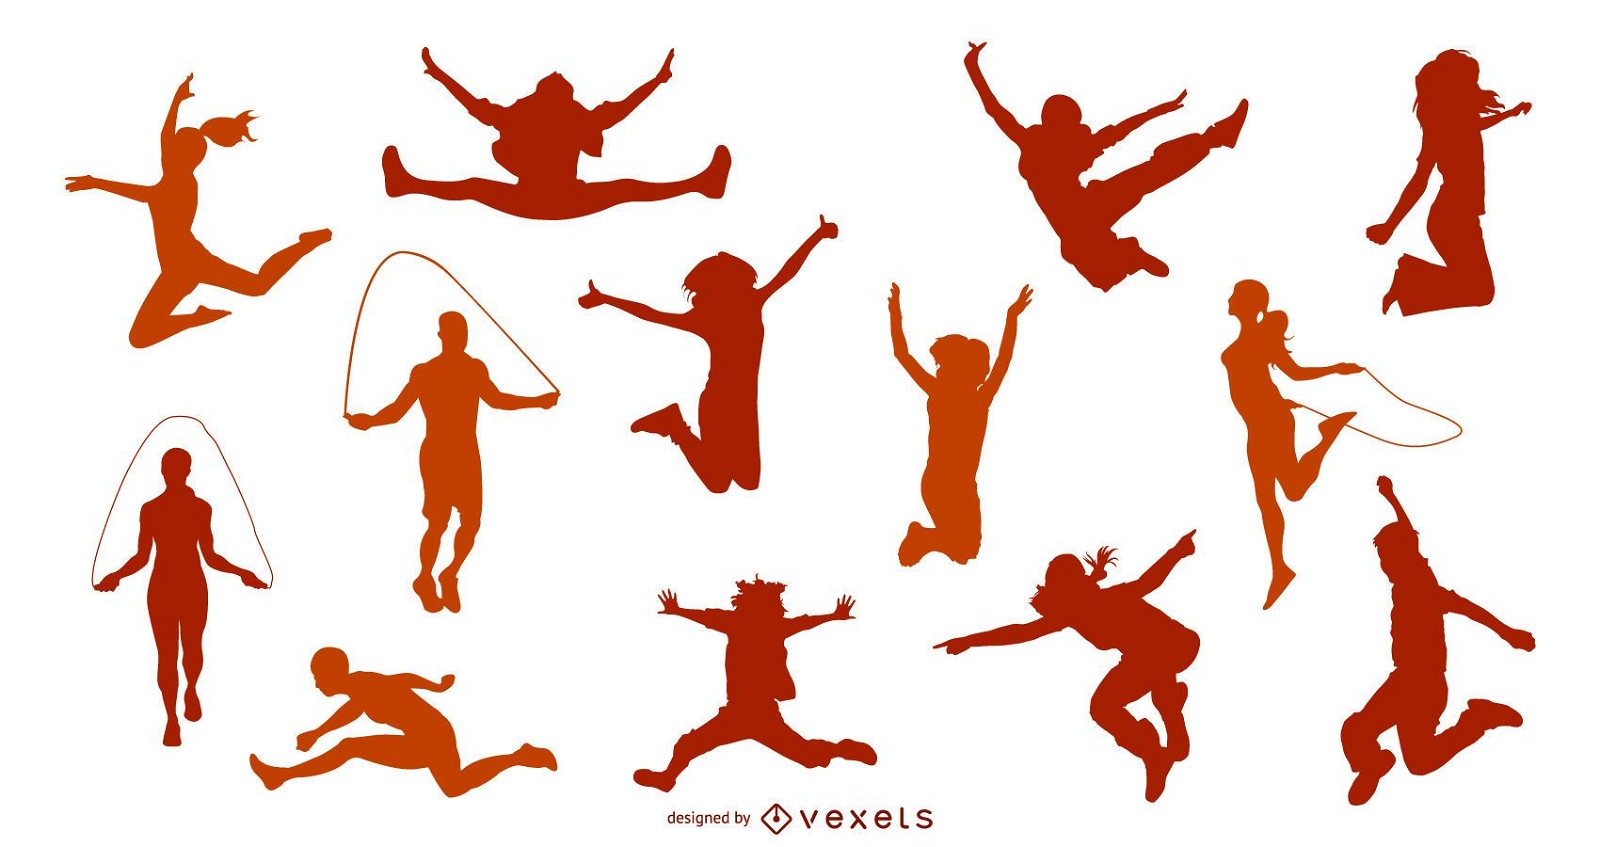 Jumping People Silhouette Design